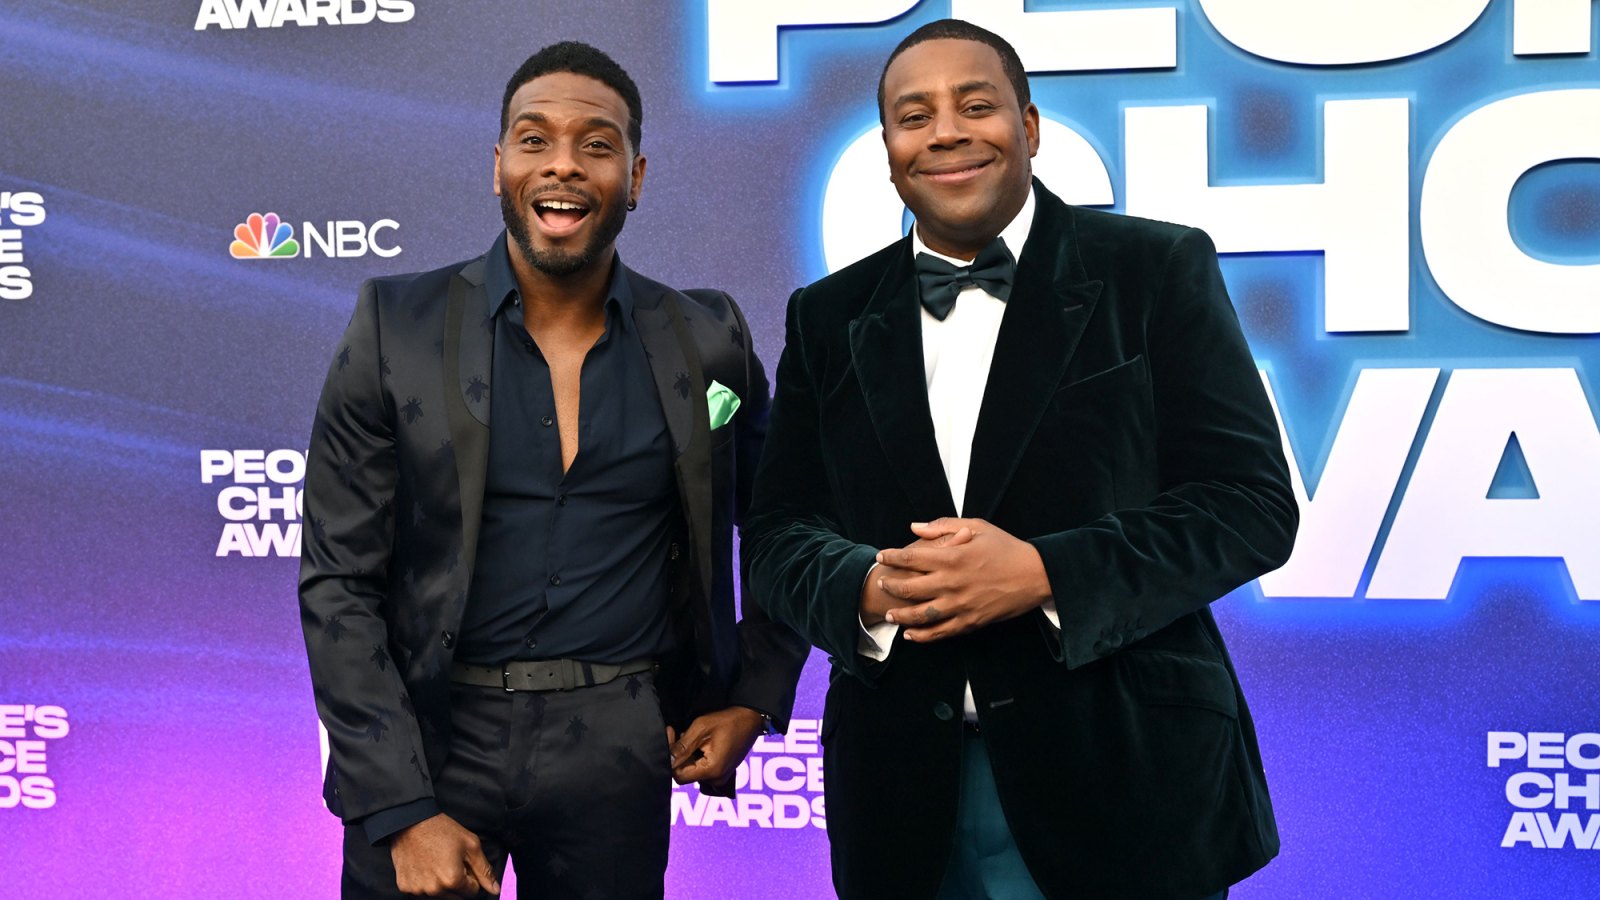 Kenan Thompson and Kel Mitchell Announce 'Good Burger 2' Is Officially Happening: 'It's a Blessing'